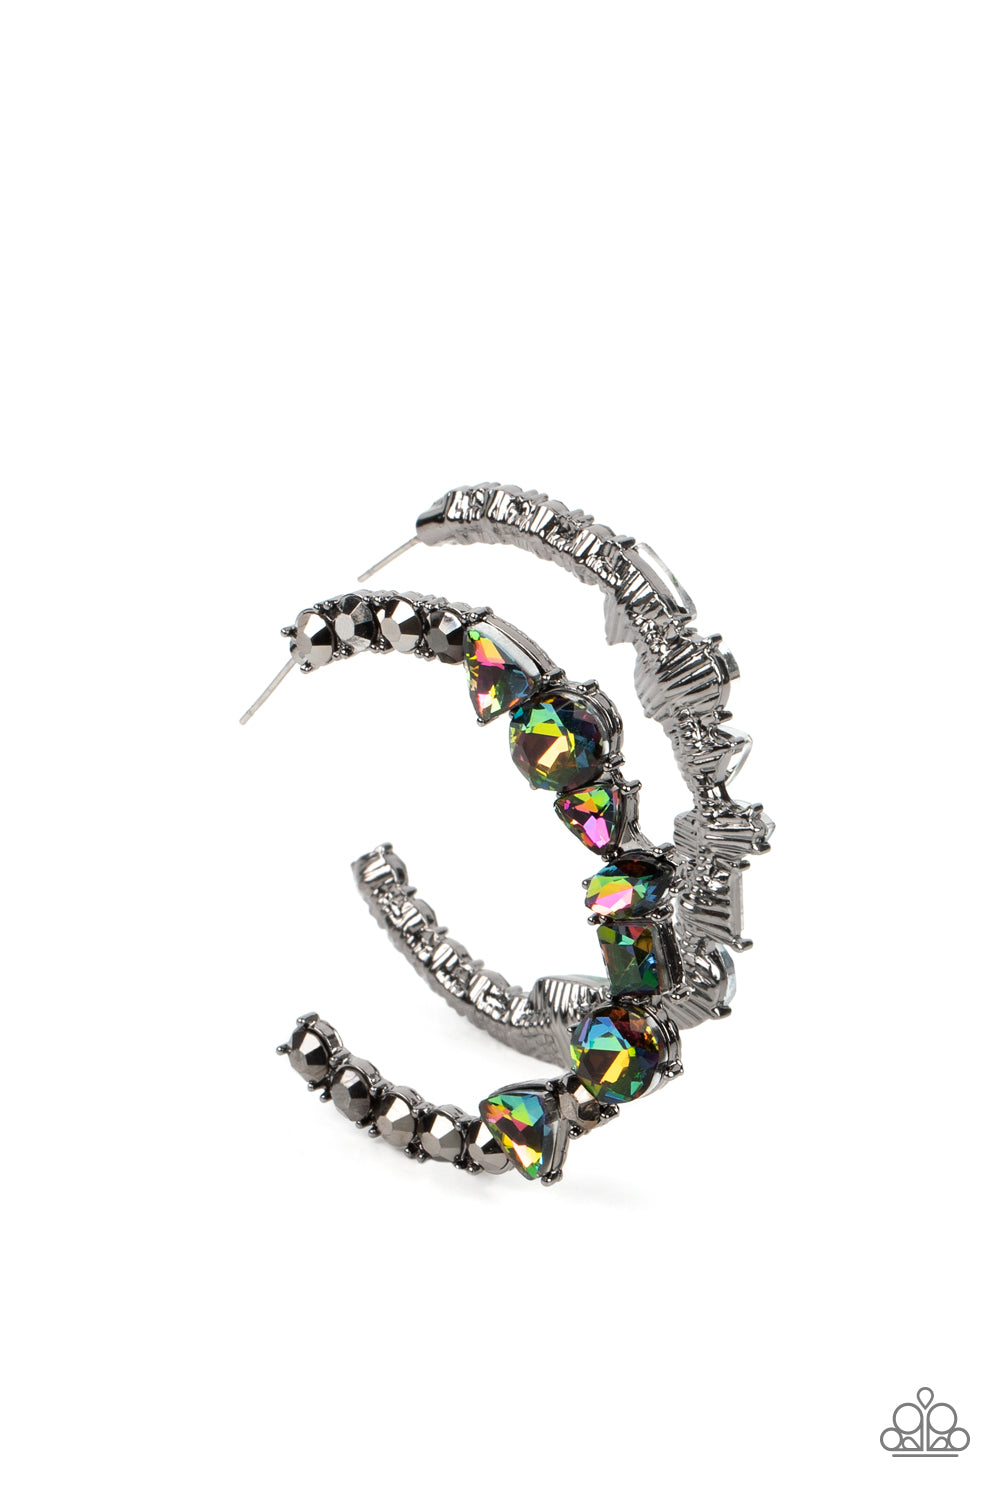 Paparazzi Accessories New Age Nostalgia - Multi Oil Spill Convention Hoop Earrings flanked by hematite rhinestones, a collection of geometric rhinestones with an oil-spill finish sleekly curve around the ear, creating a trendy, yet nostalgic display. Due to its prismatic palette, color may vary. Earring attaches to a standard post fitting. Hoop measures approximately 2" in diameter.  Sold as one pair of hoop earrings.  2022 Glow Convention 